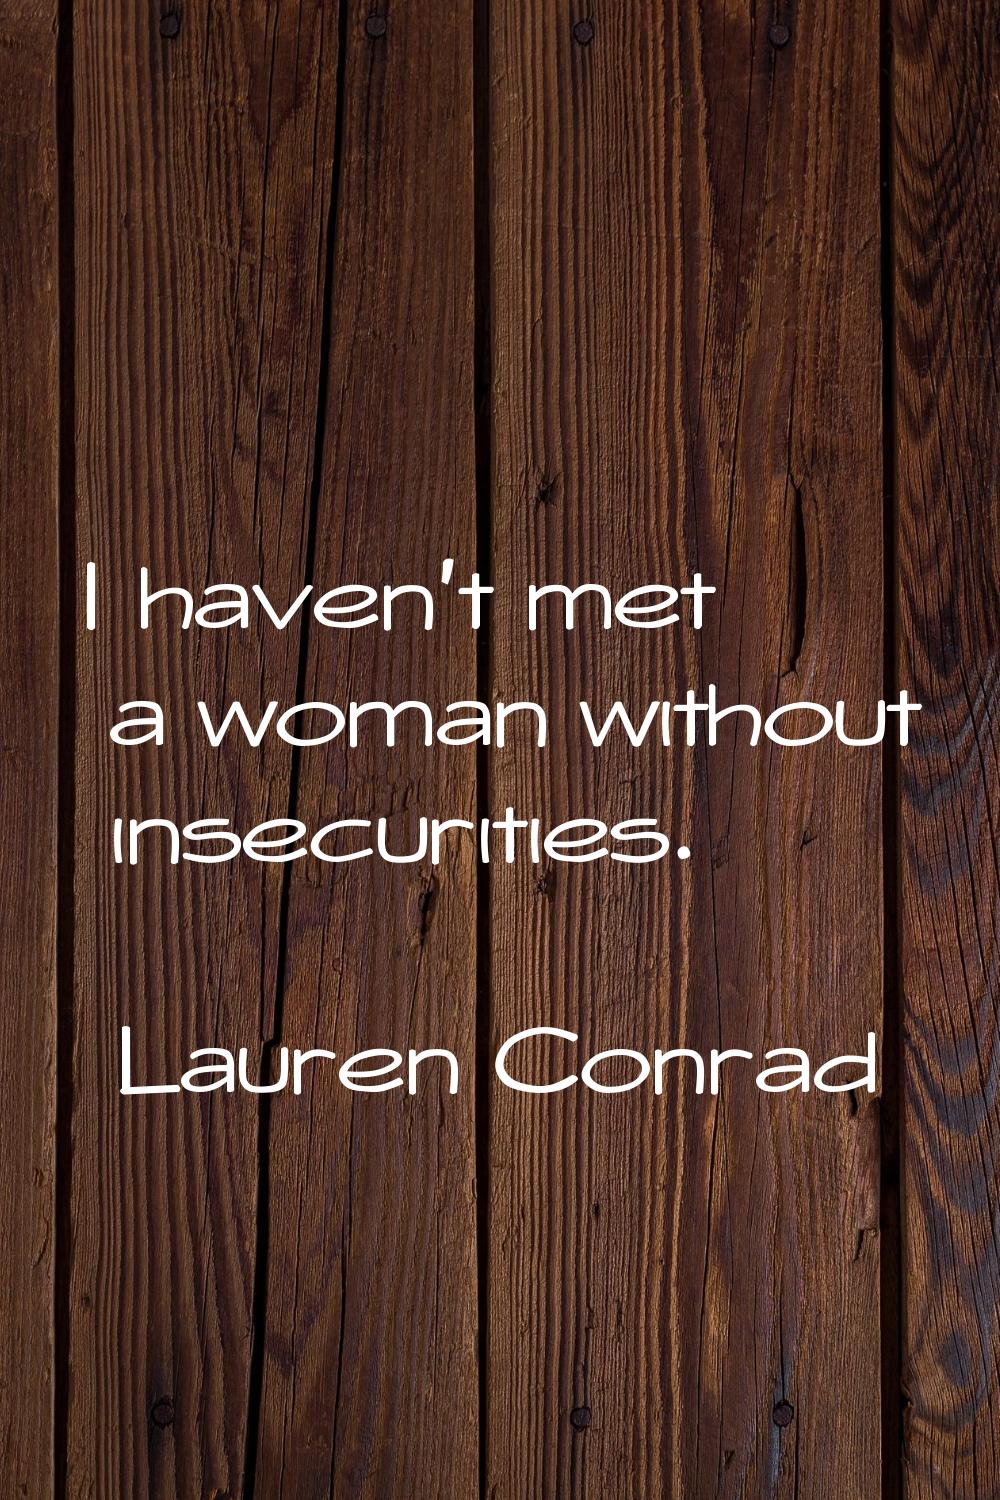 I haven't met a woman without insecurities.